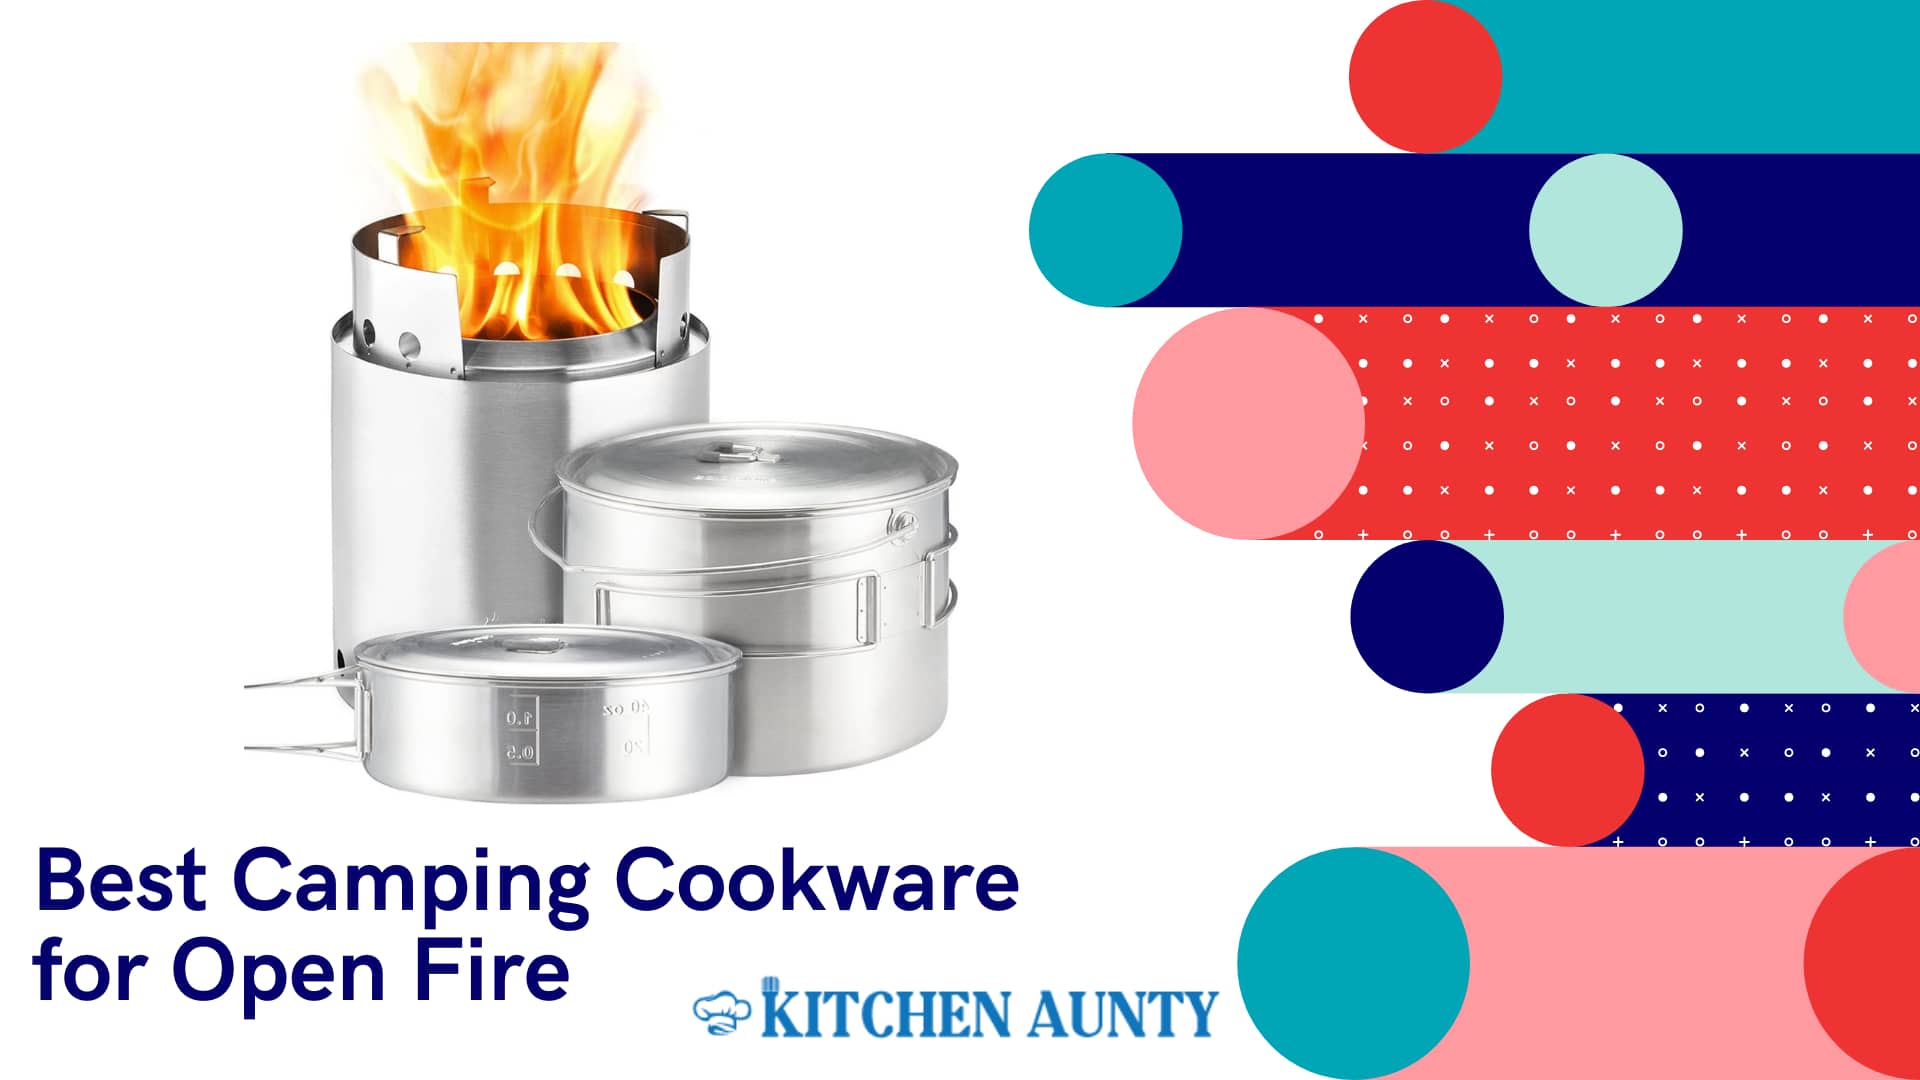 Best Camping Cookware for Open Fire